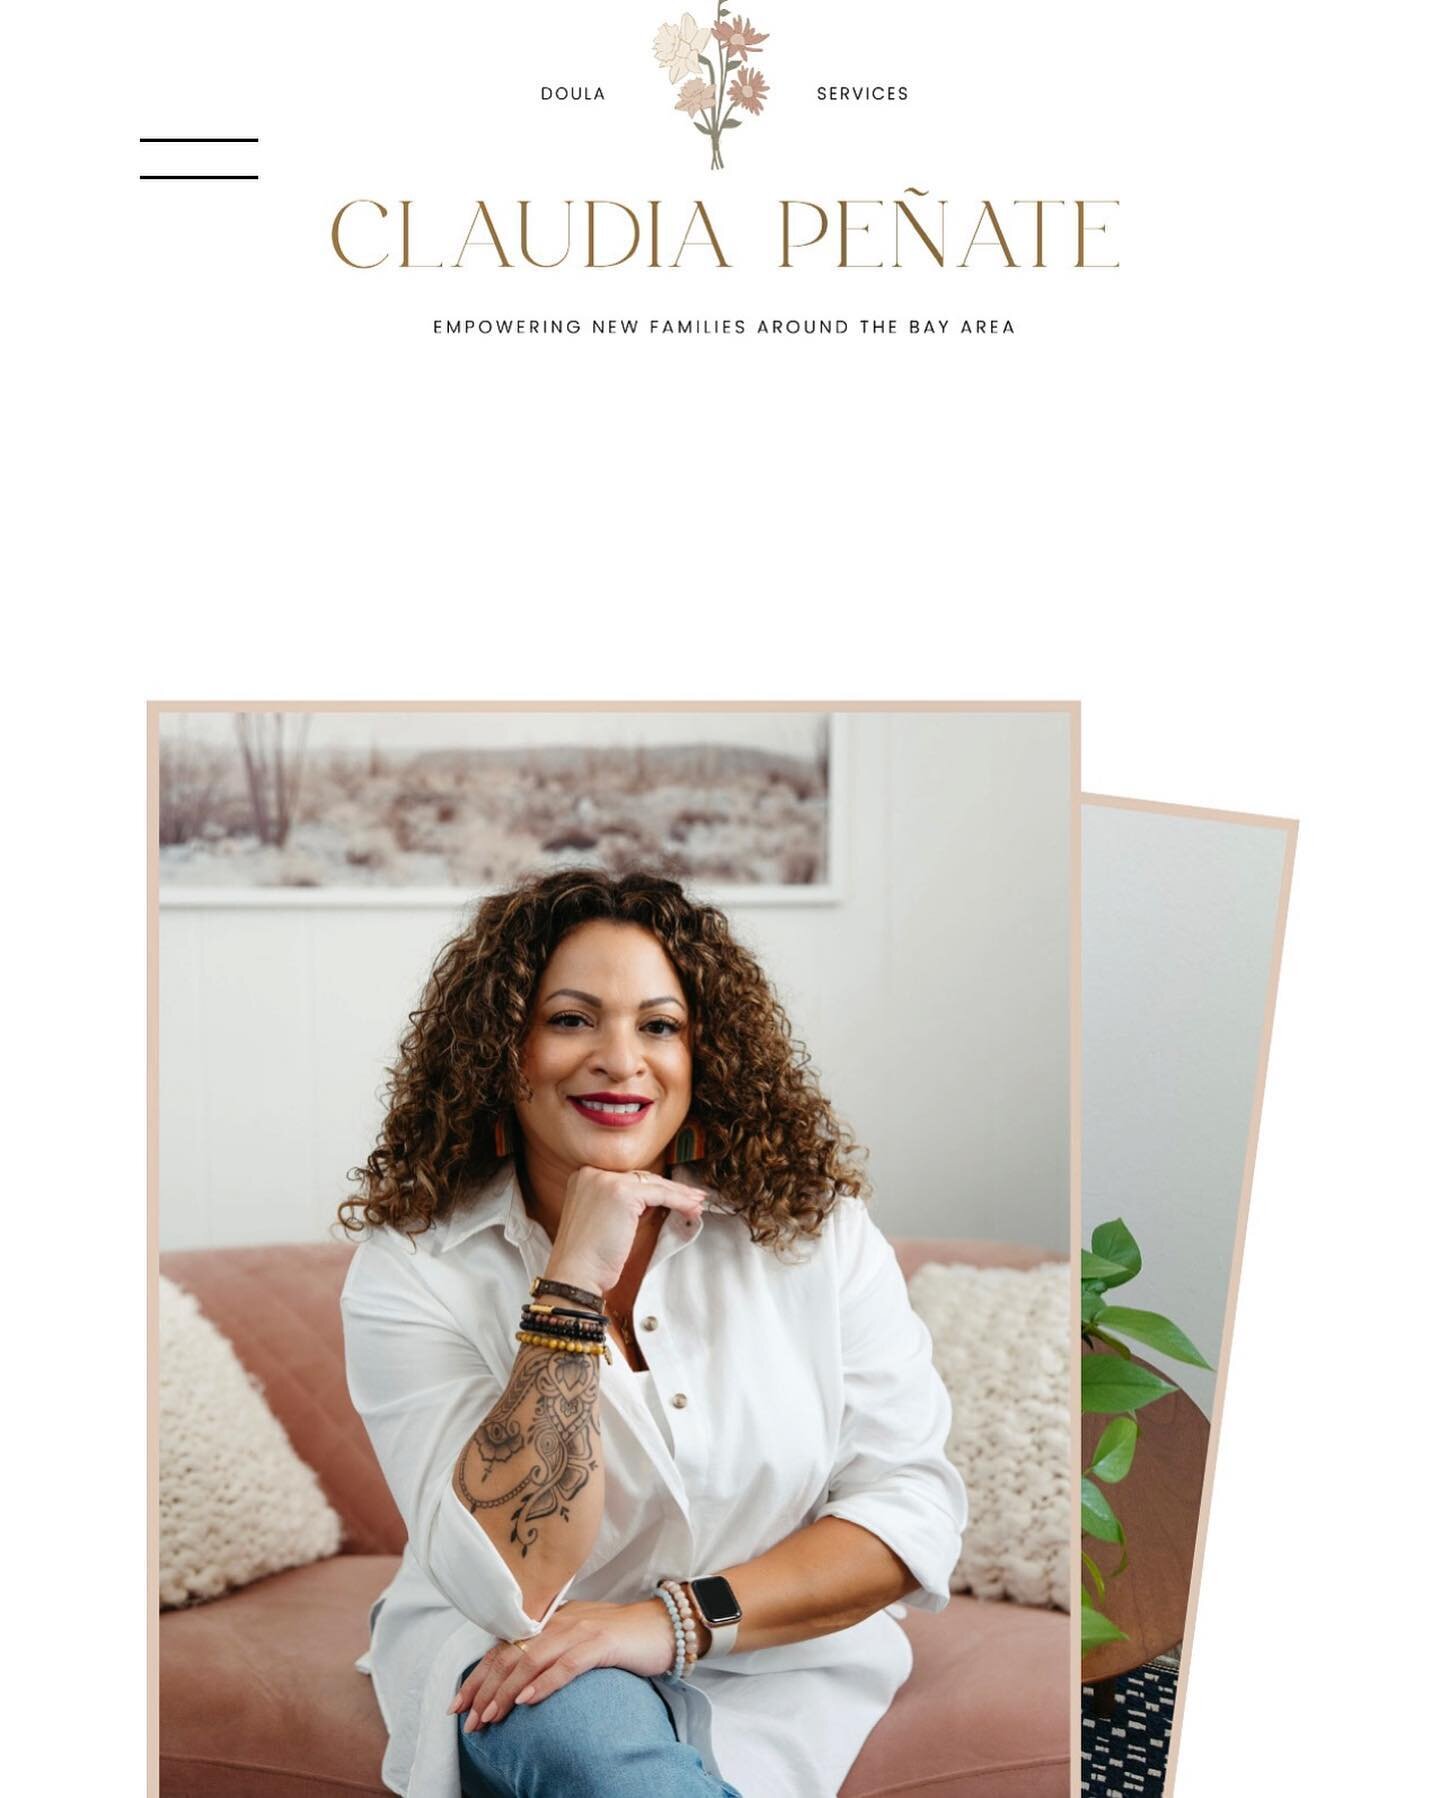 My website is LIVE !!
So proud of this project and of myself for getting out of my comfort zone and just doing it. 
My link is located up top in my bio

www.claudiapenate.com

@douladesignco Thank you so much for making it come true 
@angelajazmin.st